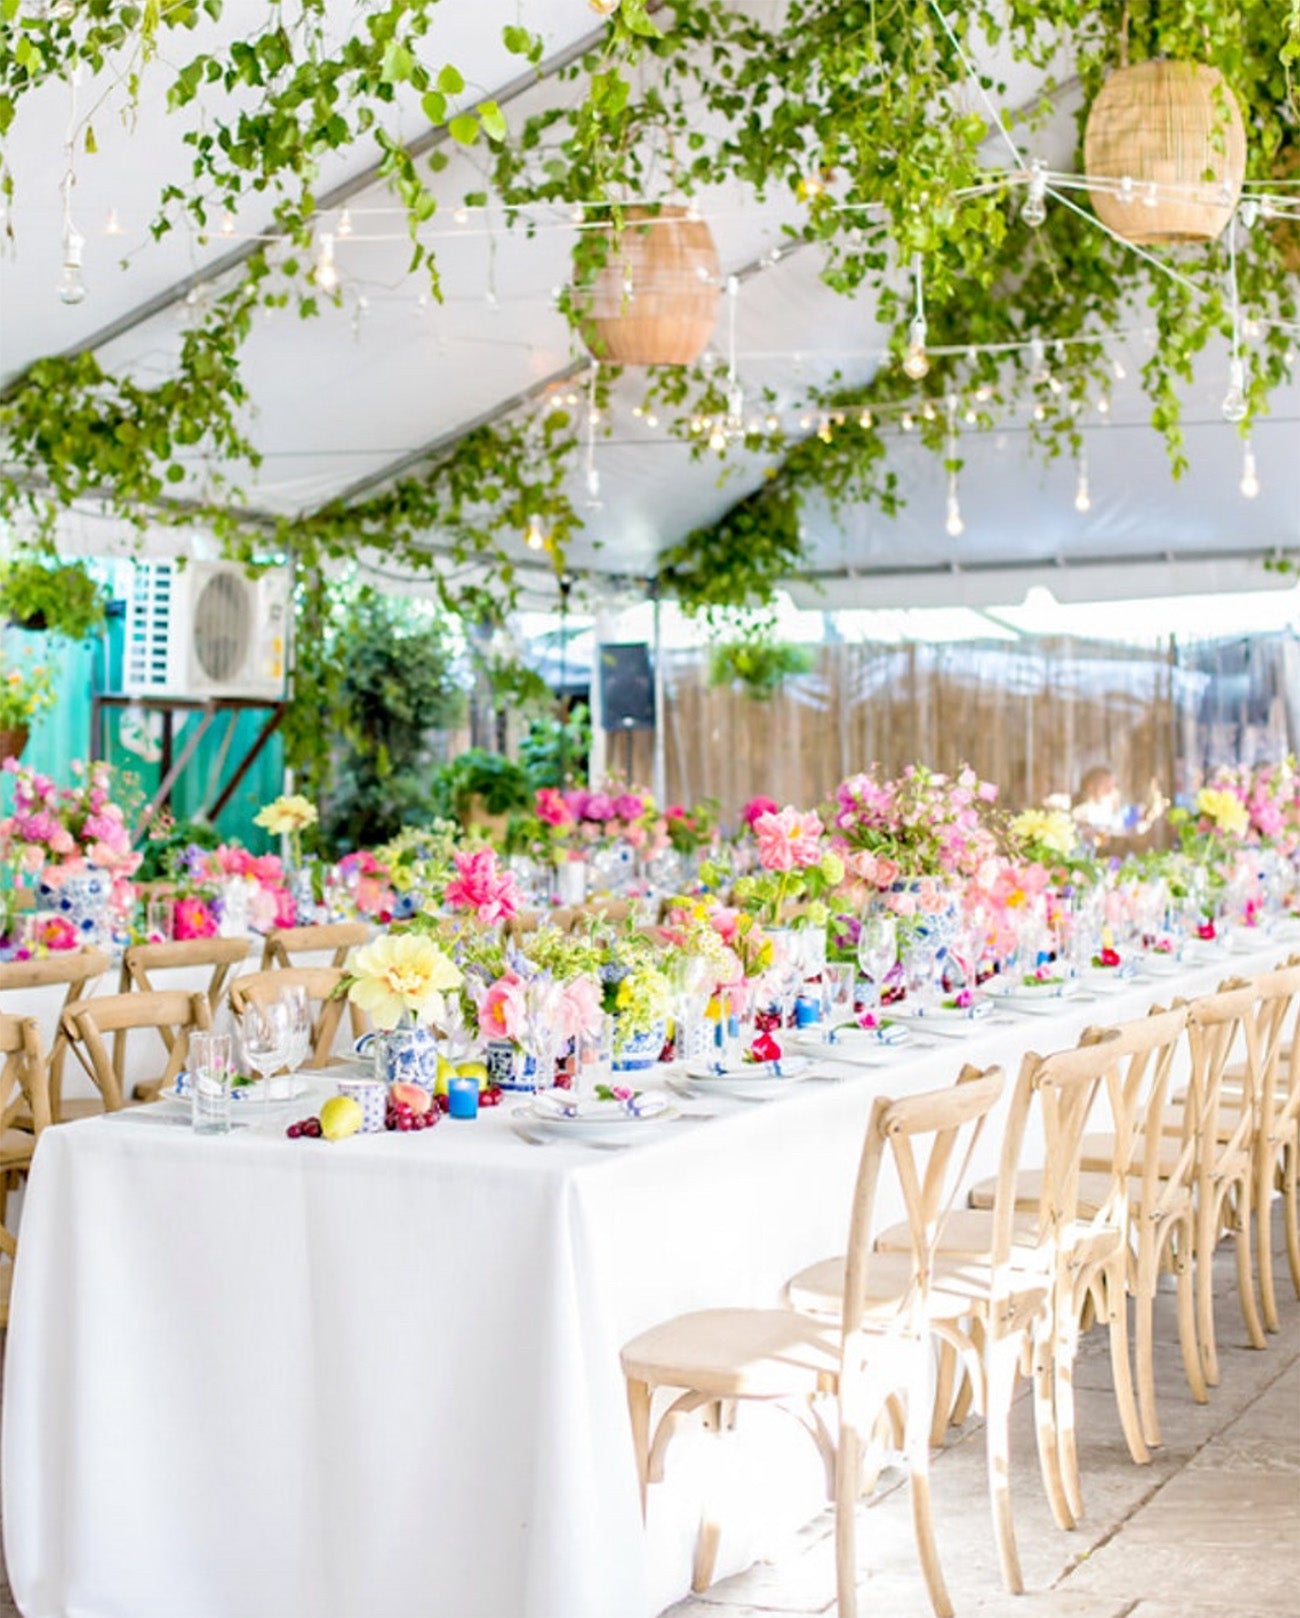 A wedding venue guest table in a tent with flowers and greenery.